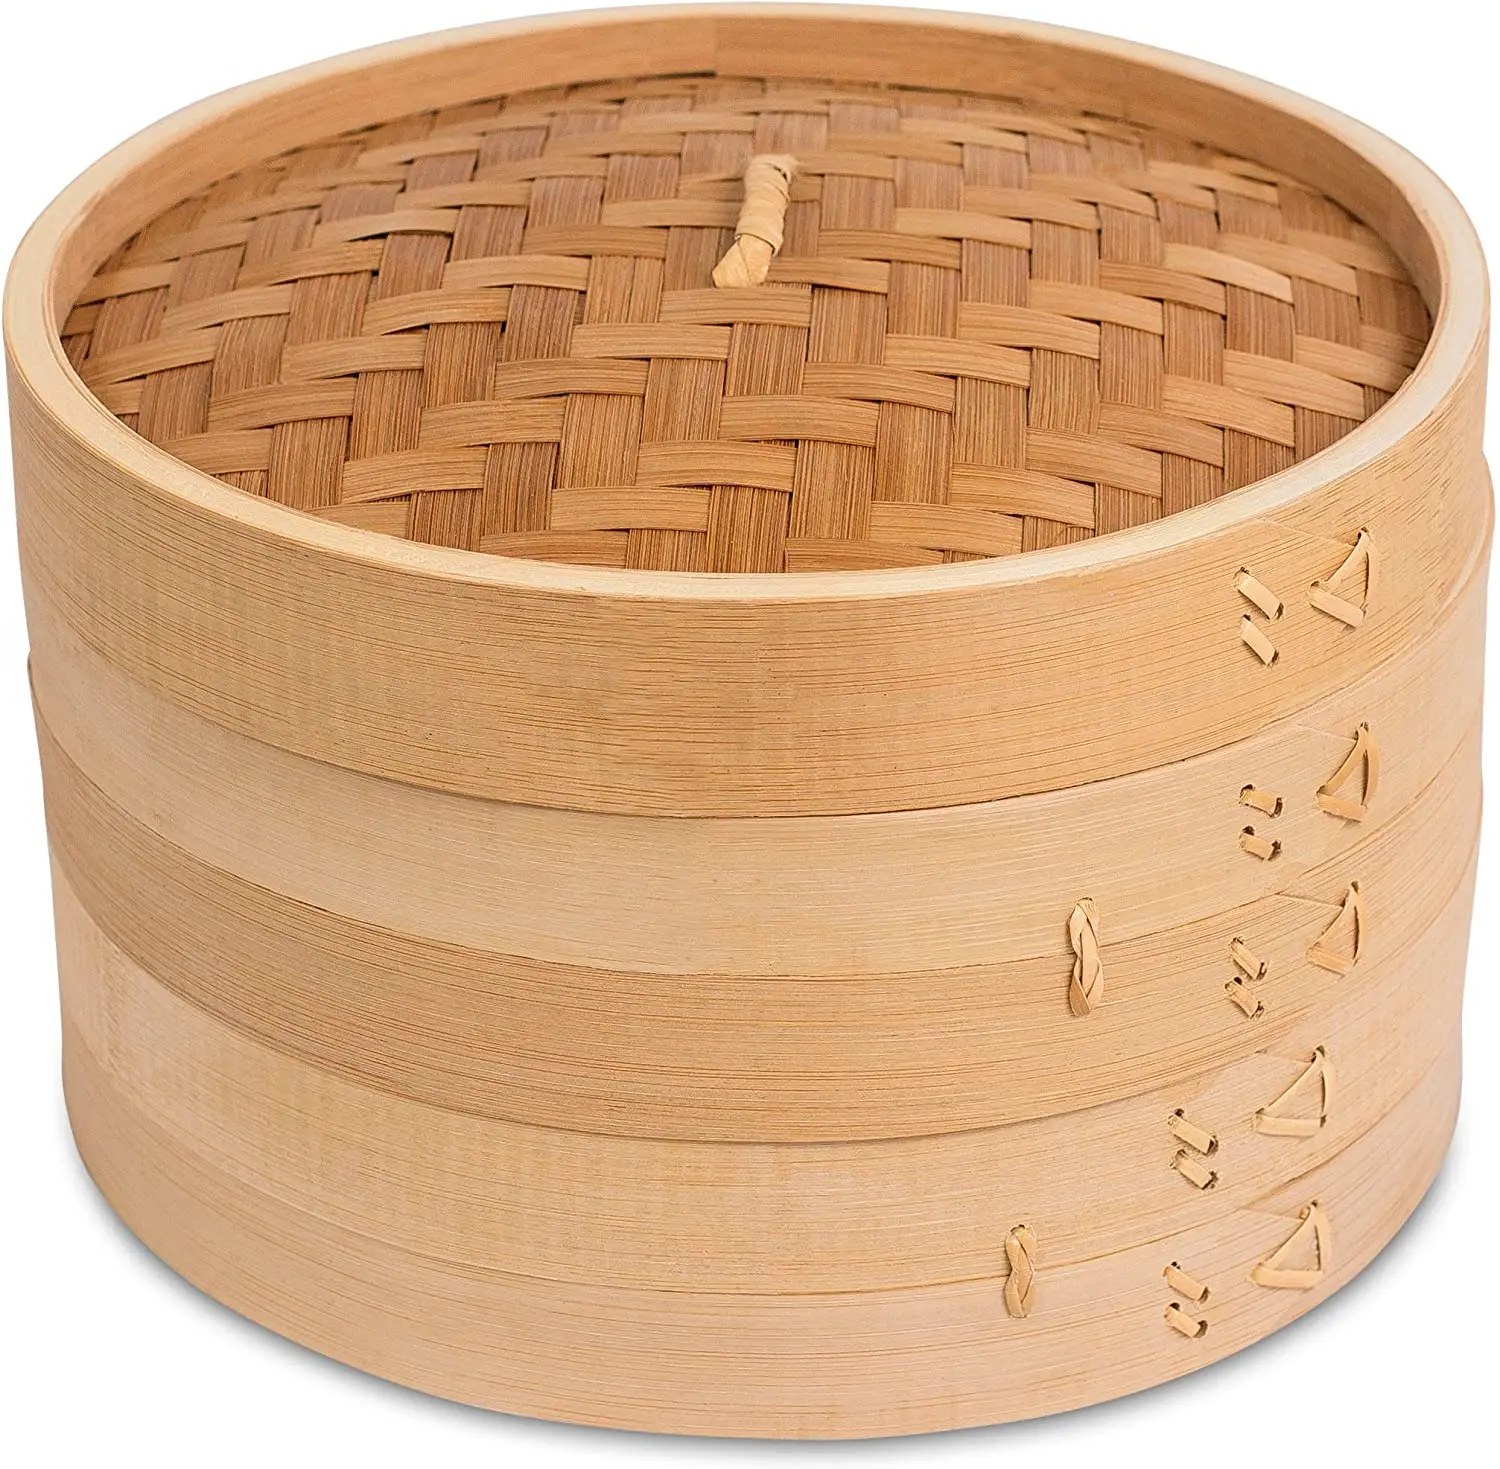 

Bamboo 10-inch food container Steamer Basket Set with Lid, Healthy Cooking for Vegetables, Natural bamboo color